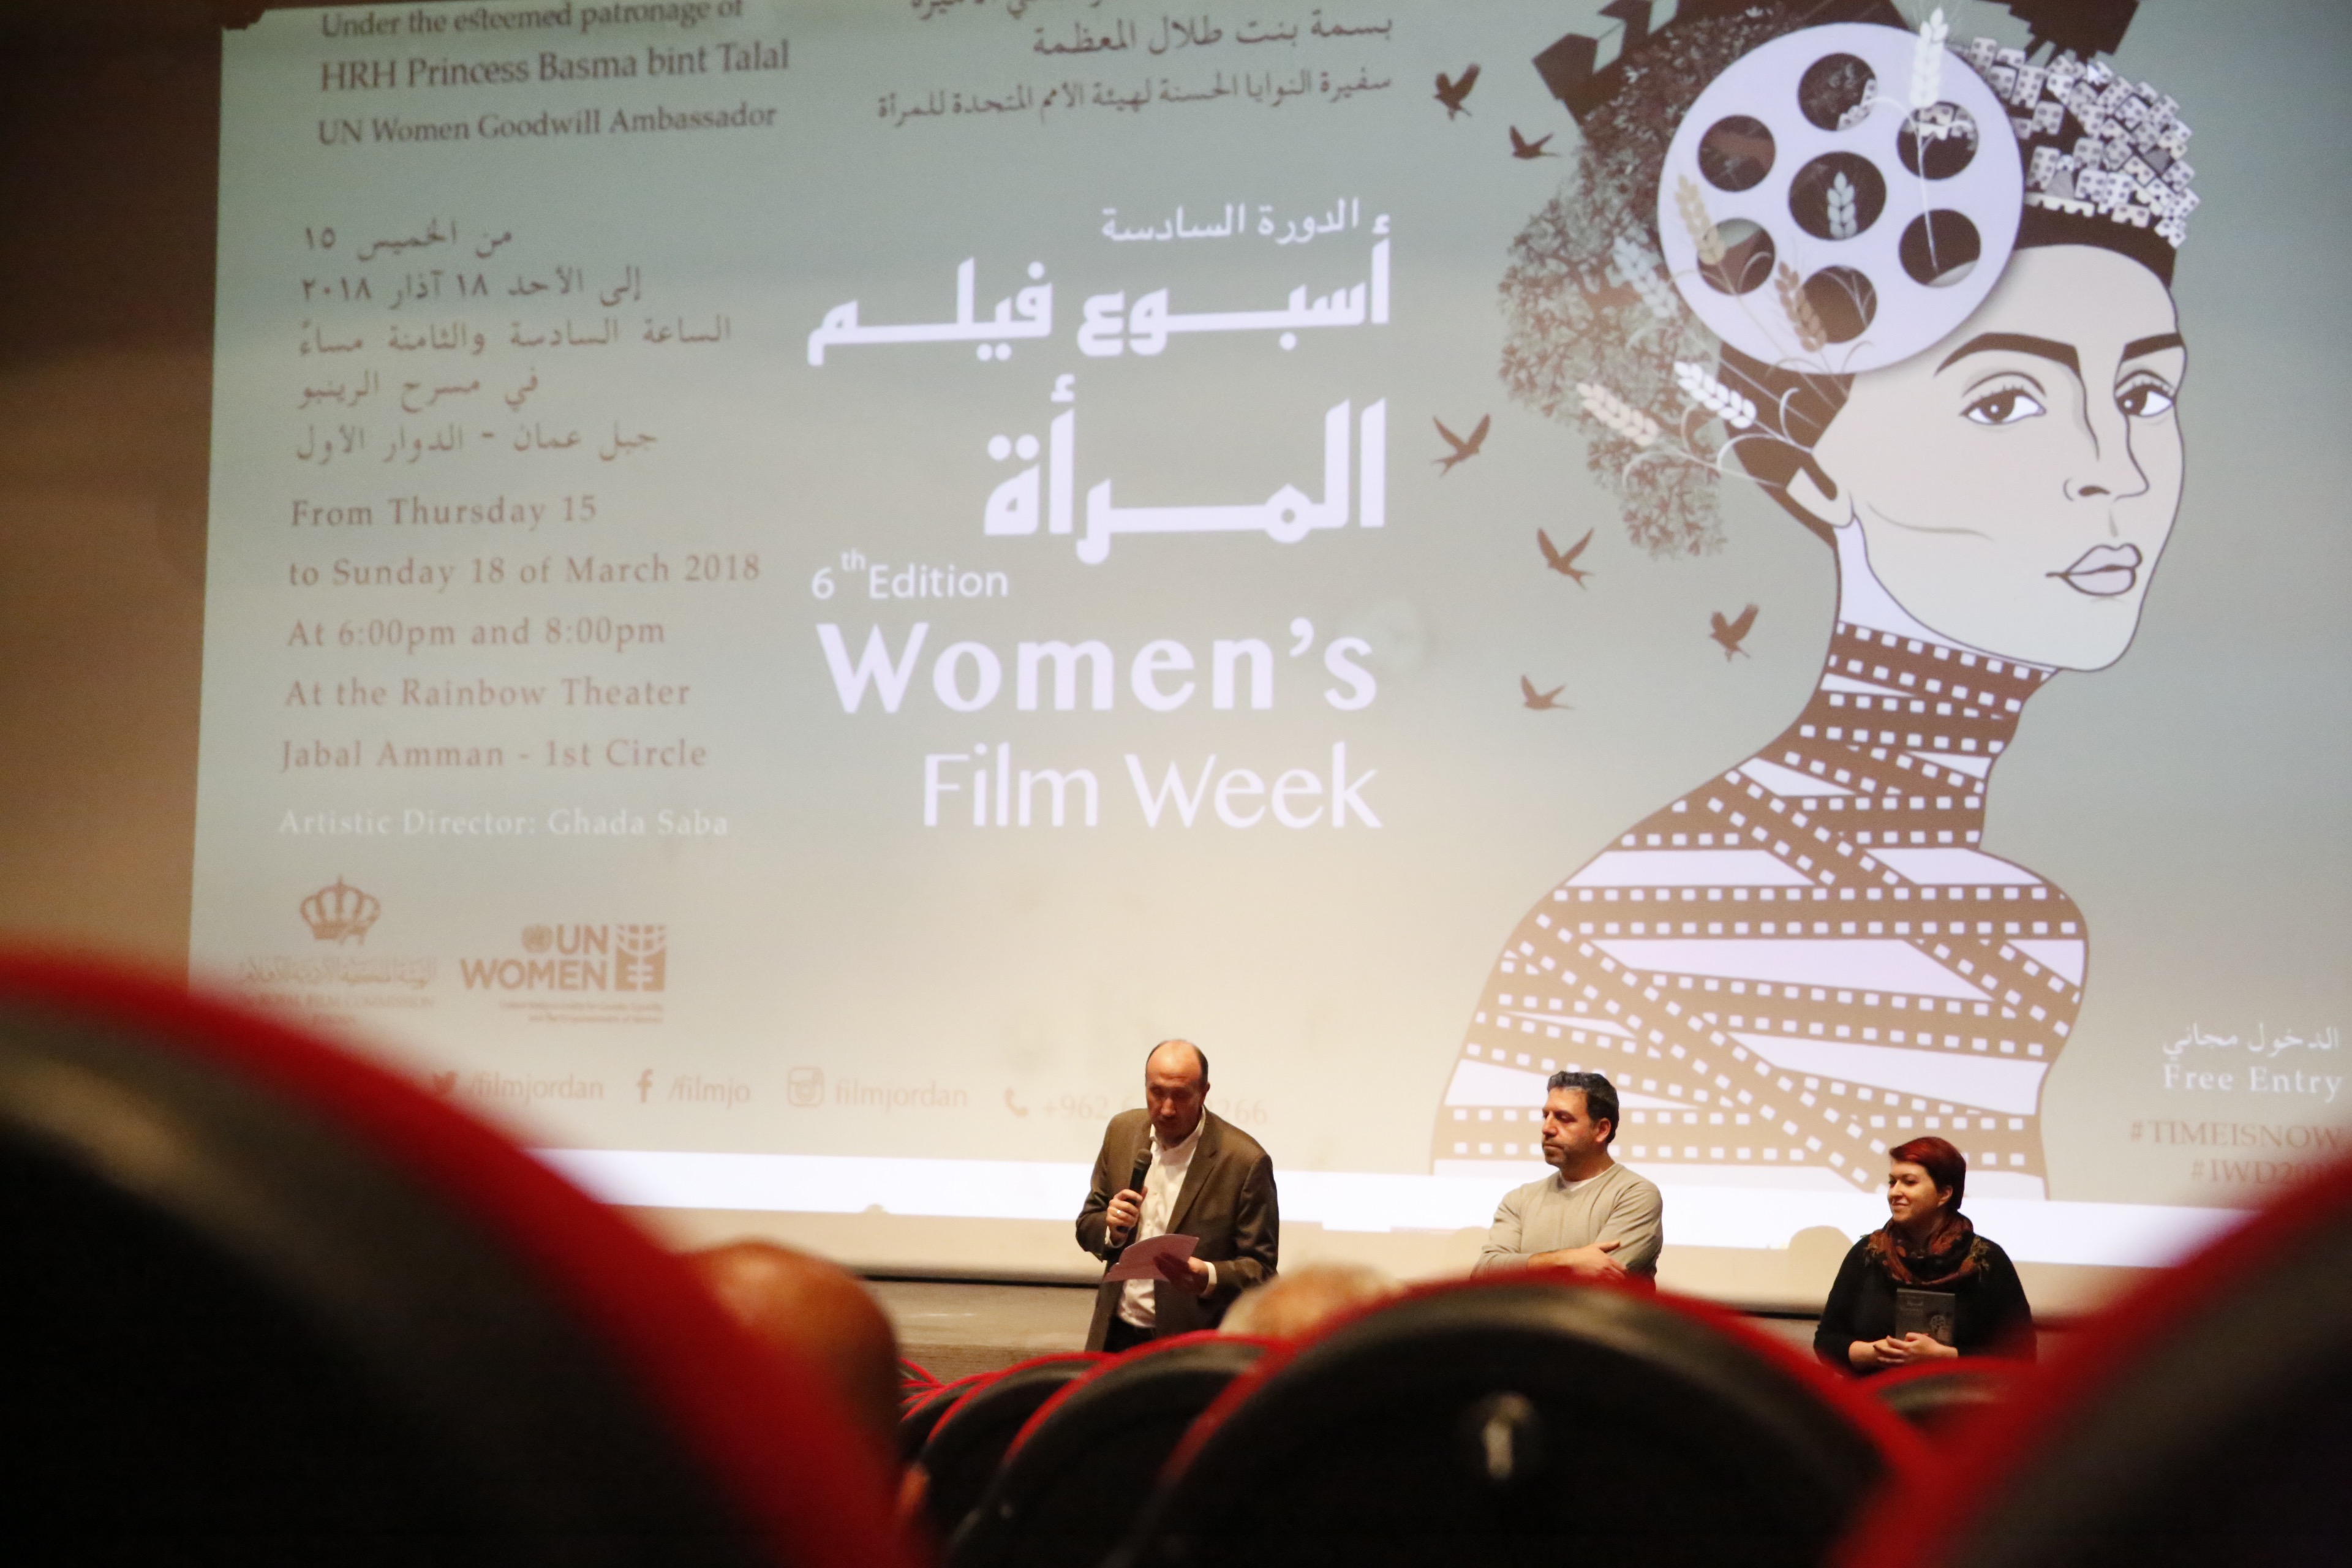 United Nations Entity for Gender Equality and Women’s Empowerment (UN Women), in partnership with the Royal Film Commission, launched the 6th edition of the Women Film Week to mark International Women’s Day under the global theme. UN Women have worked closely with various Embassies to attain films from across the Globe adhering to the theme, the American Embassy provided ‘CodeGirl’ for the screening, in which Cultural Affairs Attache Ali Lejlic presents the screening. 